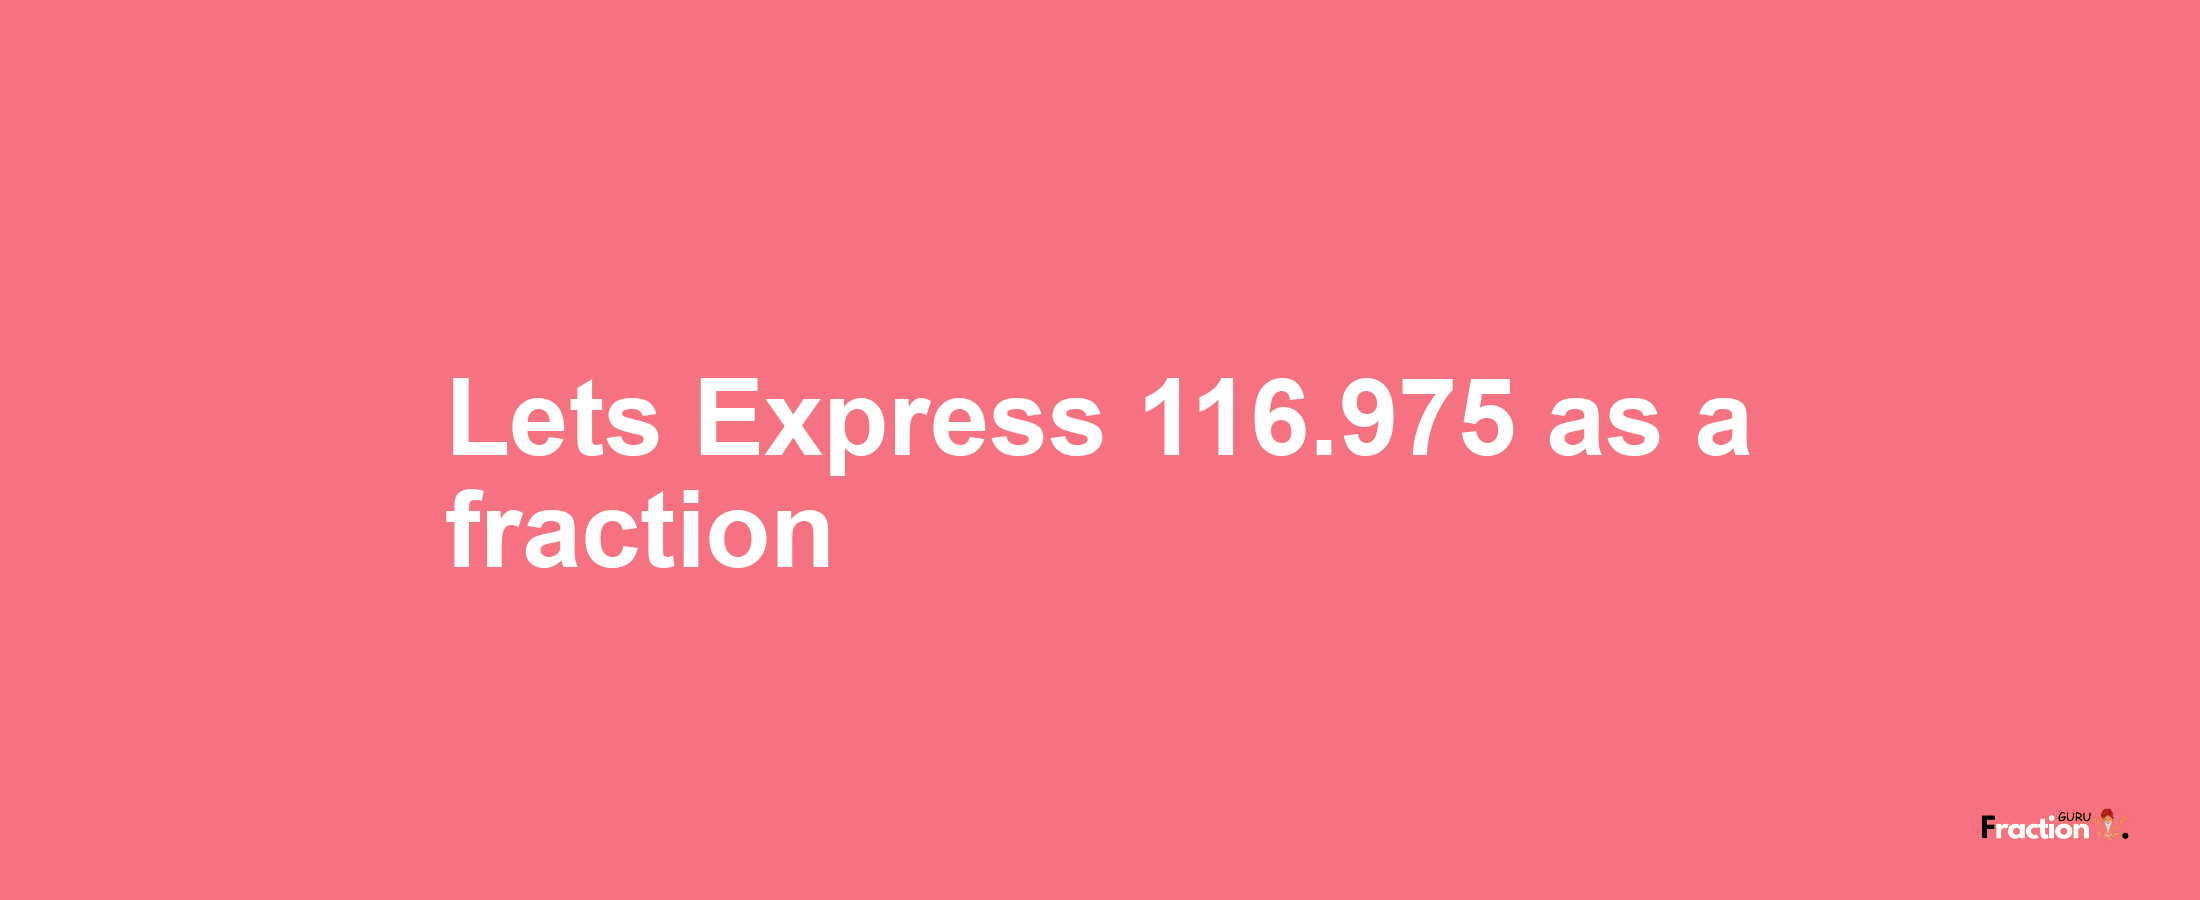 Lets Express 116.975 as afraction